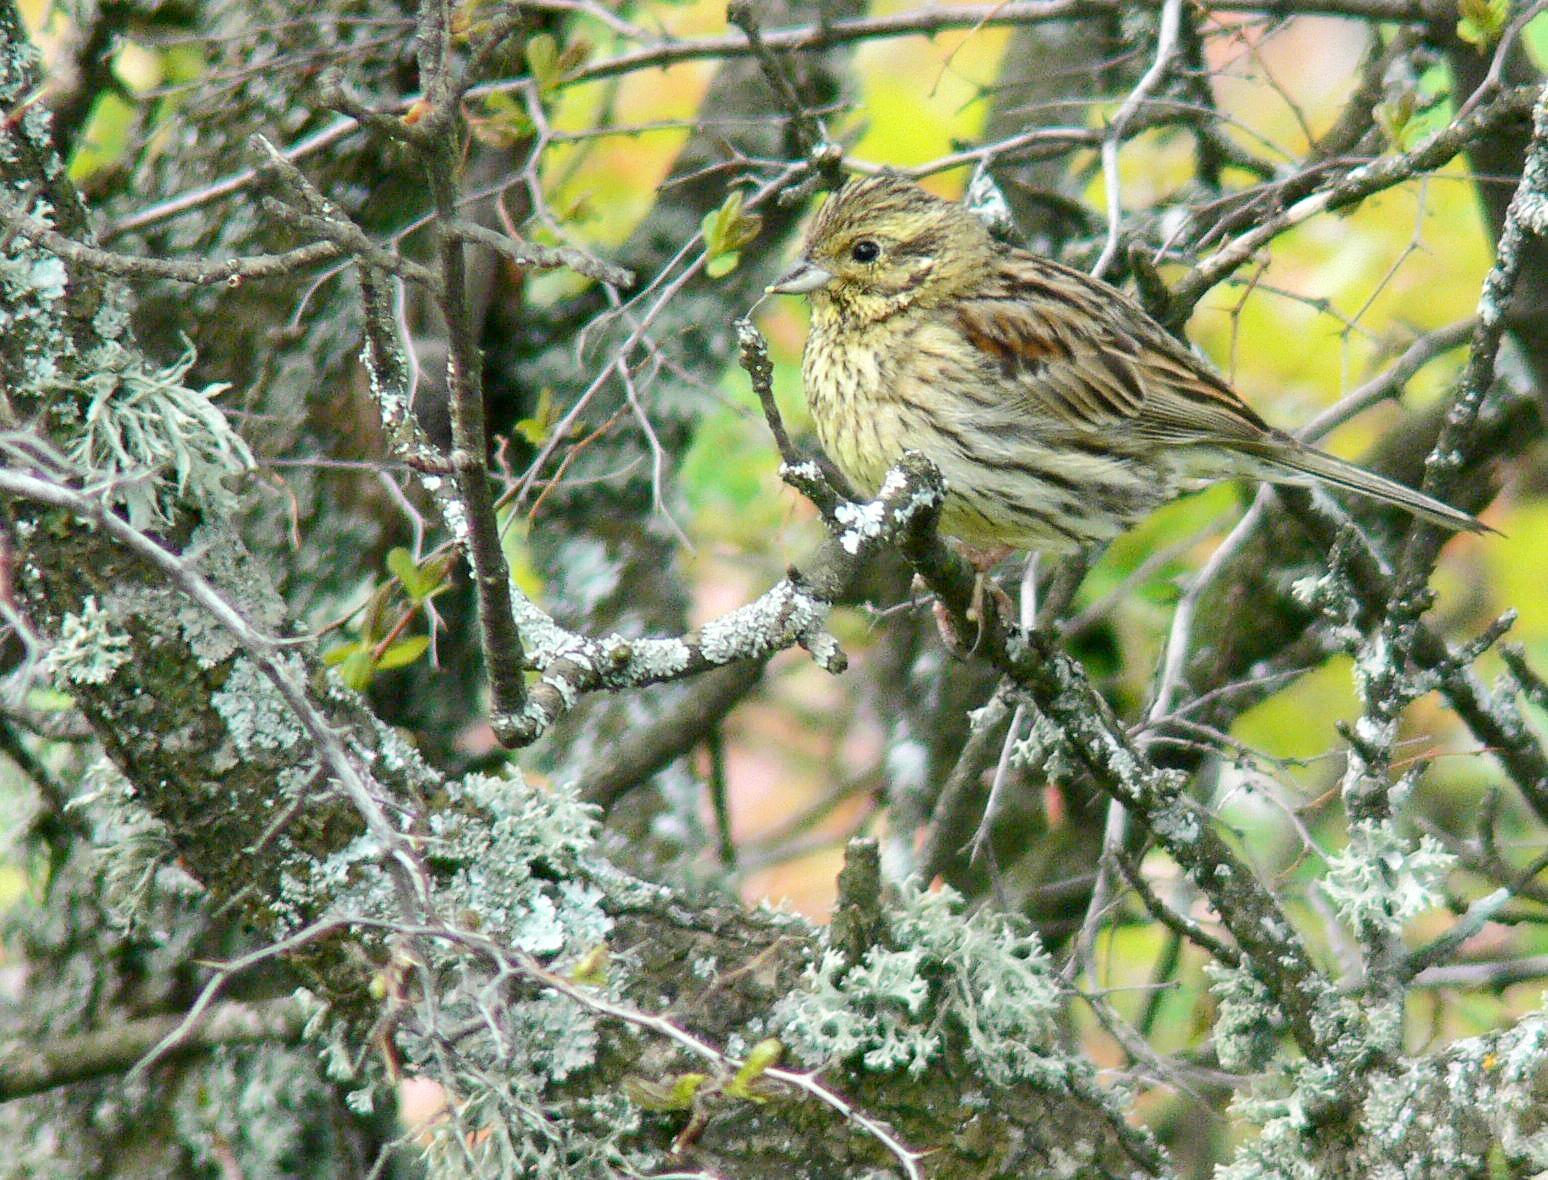 Cirl Bunting Photo by Steven Mlodinow